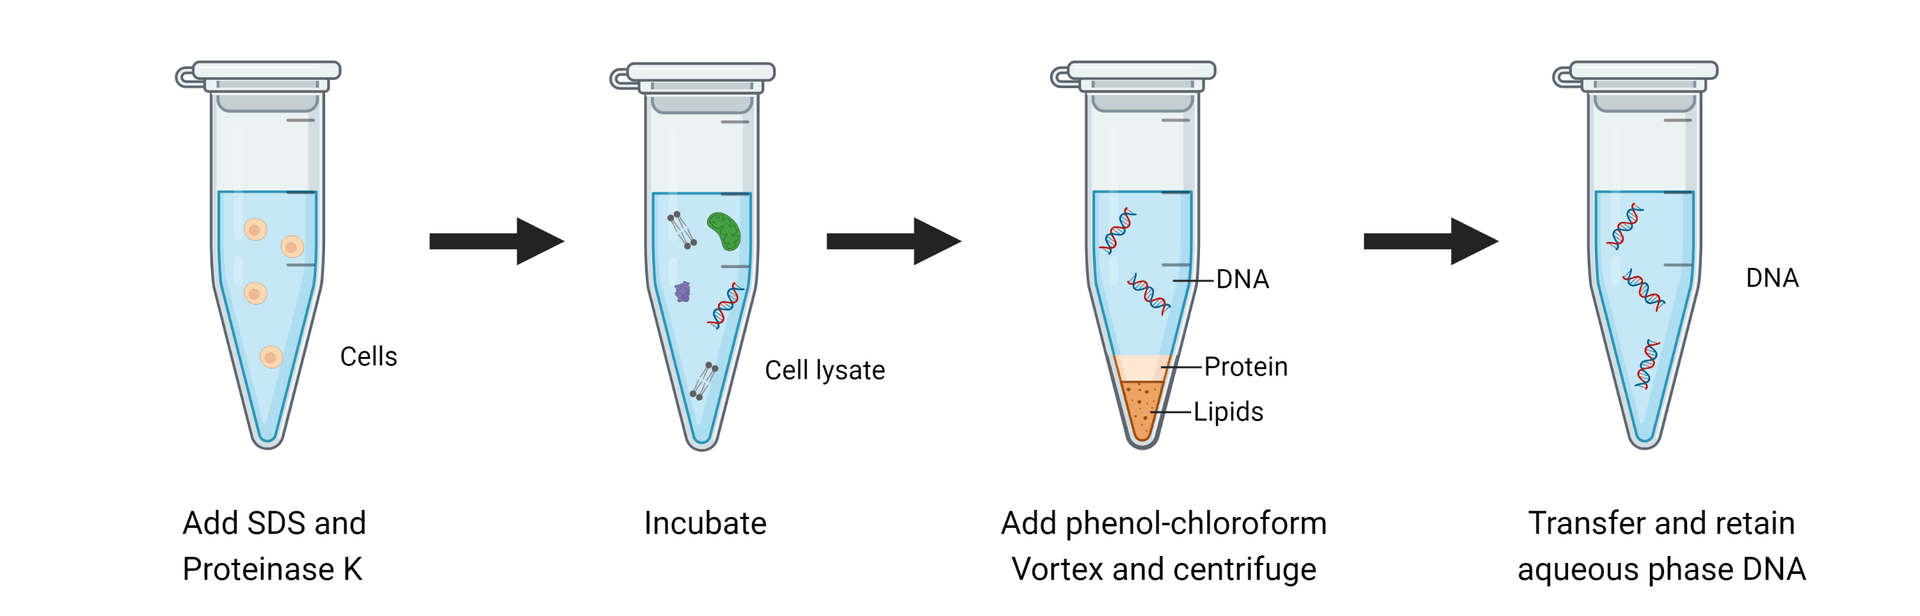 Organic DNA extraction workflow